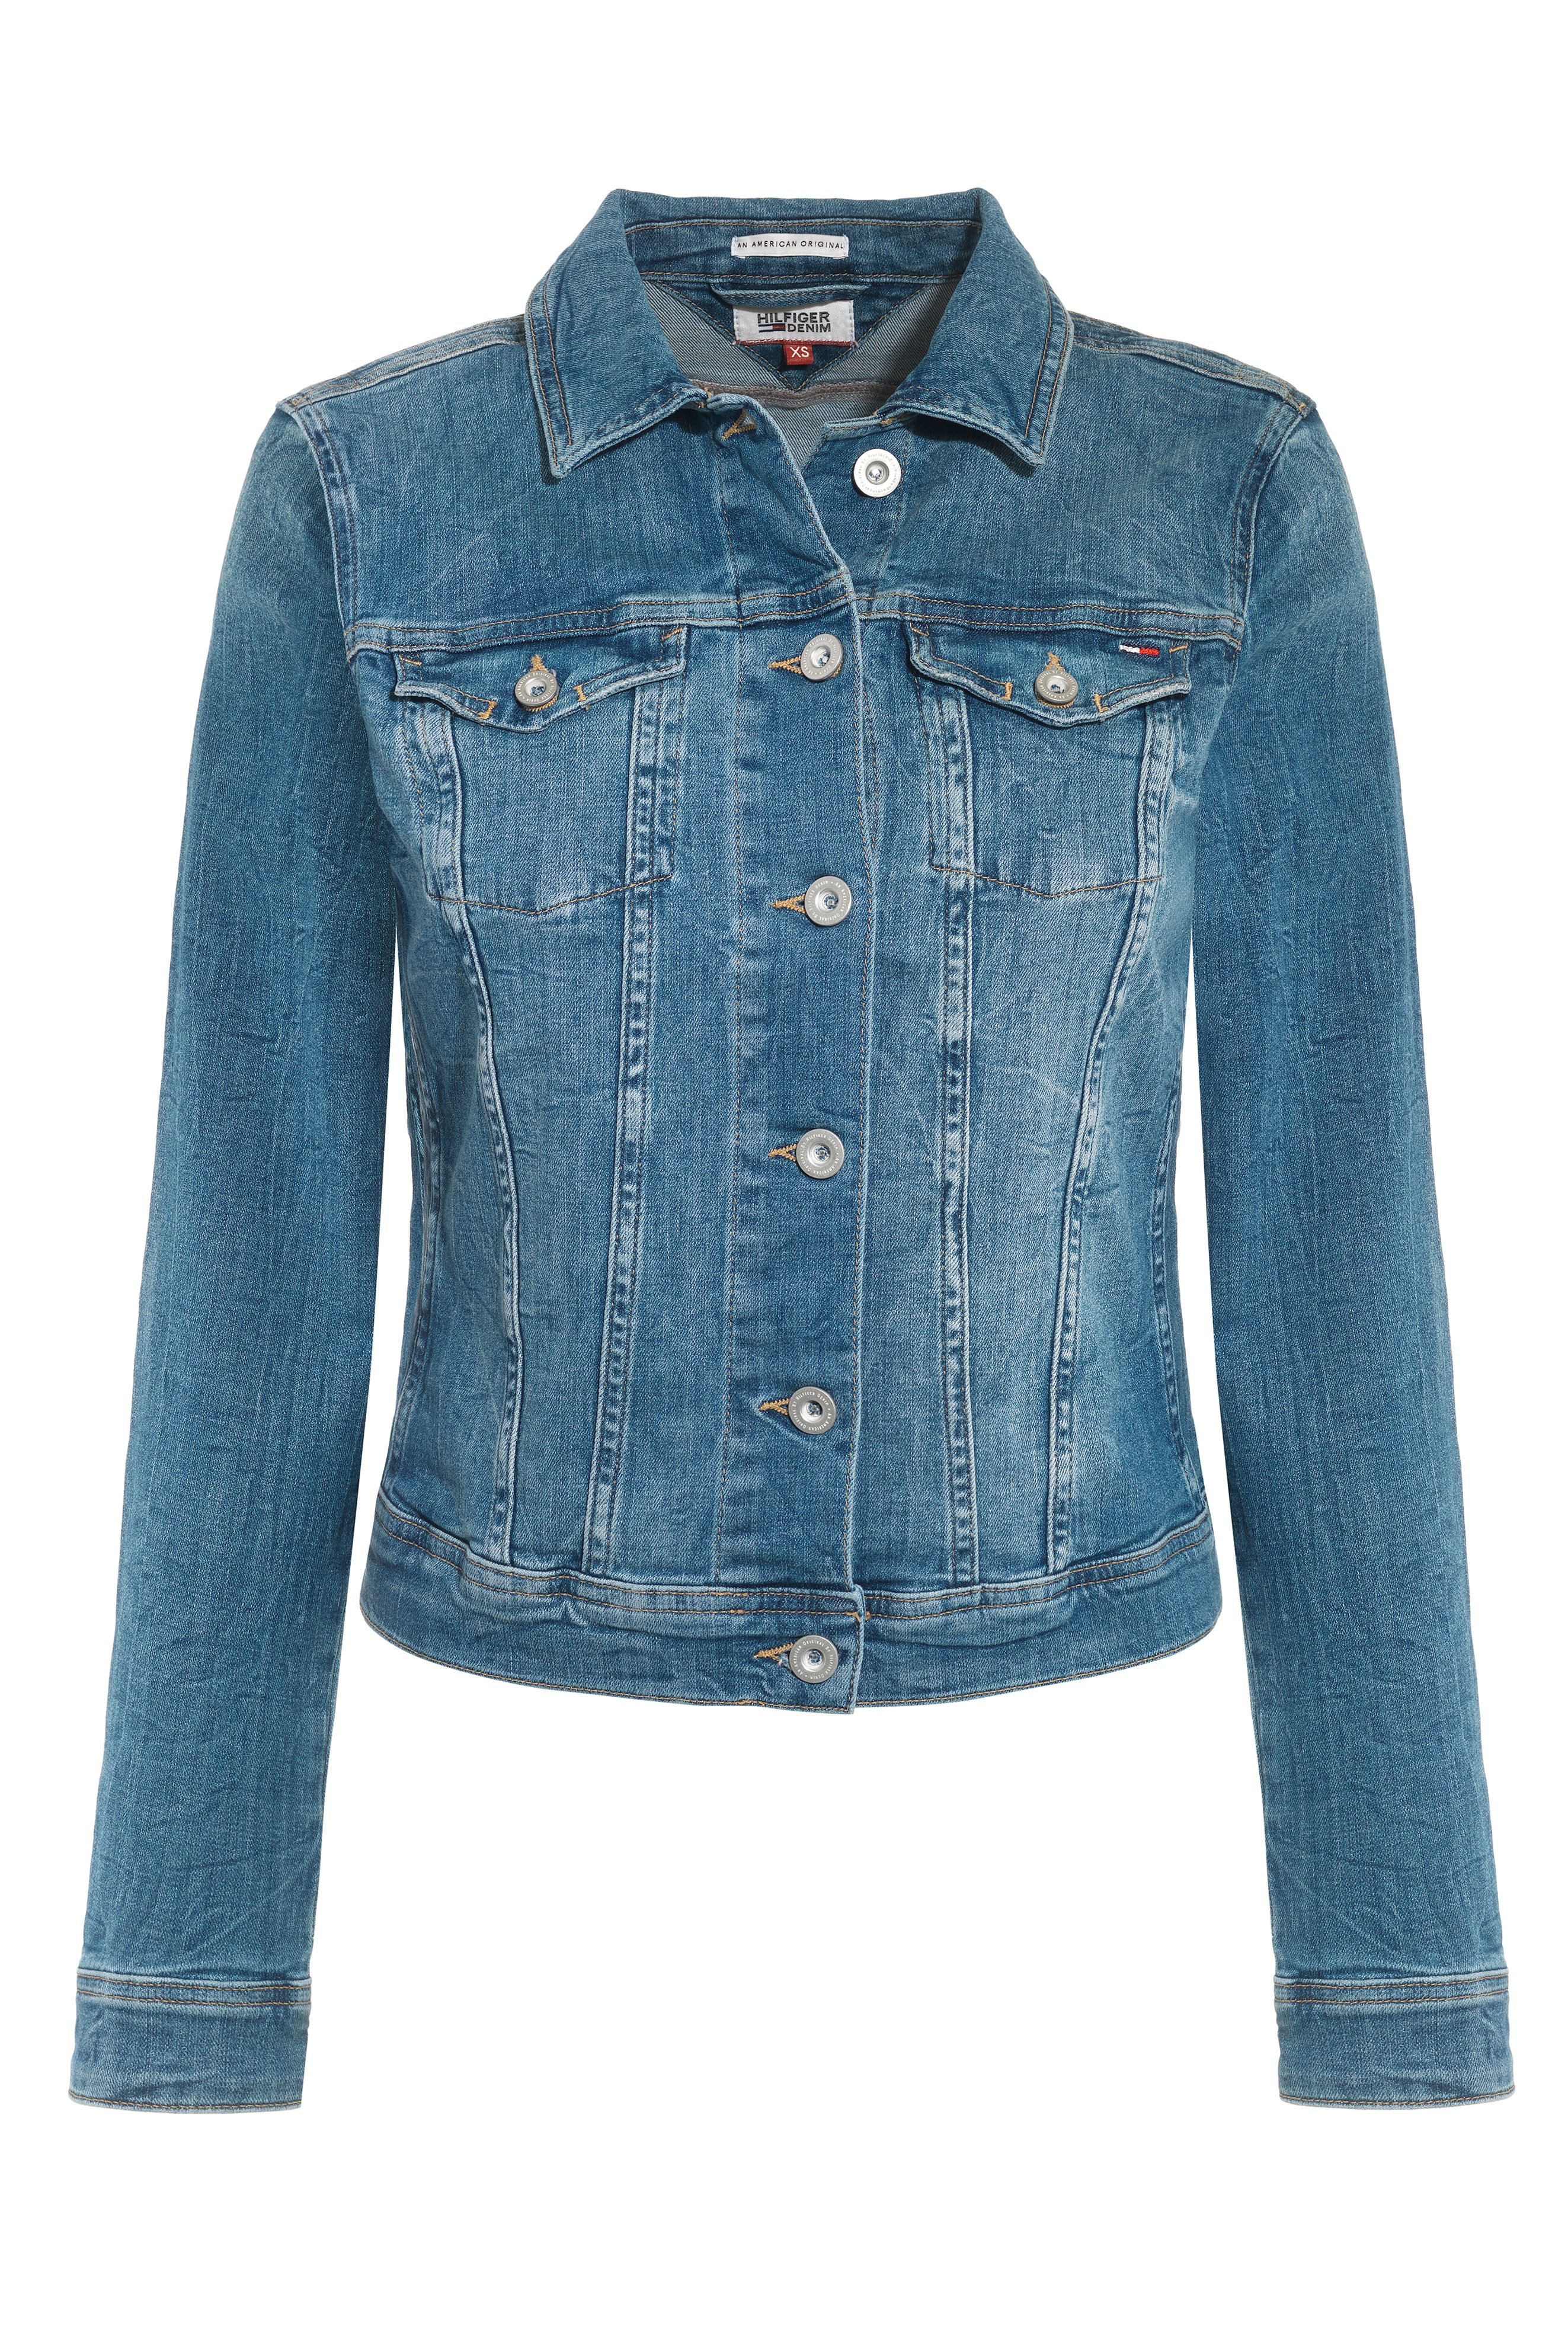 Tommy Hilfiger Vivianne Denim Jacket, Buy Now, Clearance, 54% OFF,  ricettecuco.it